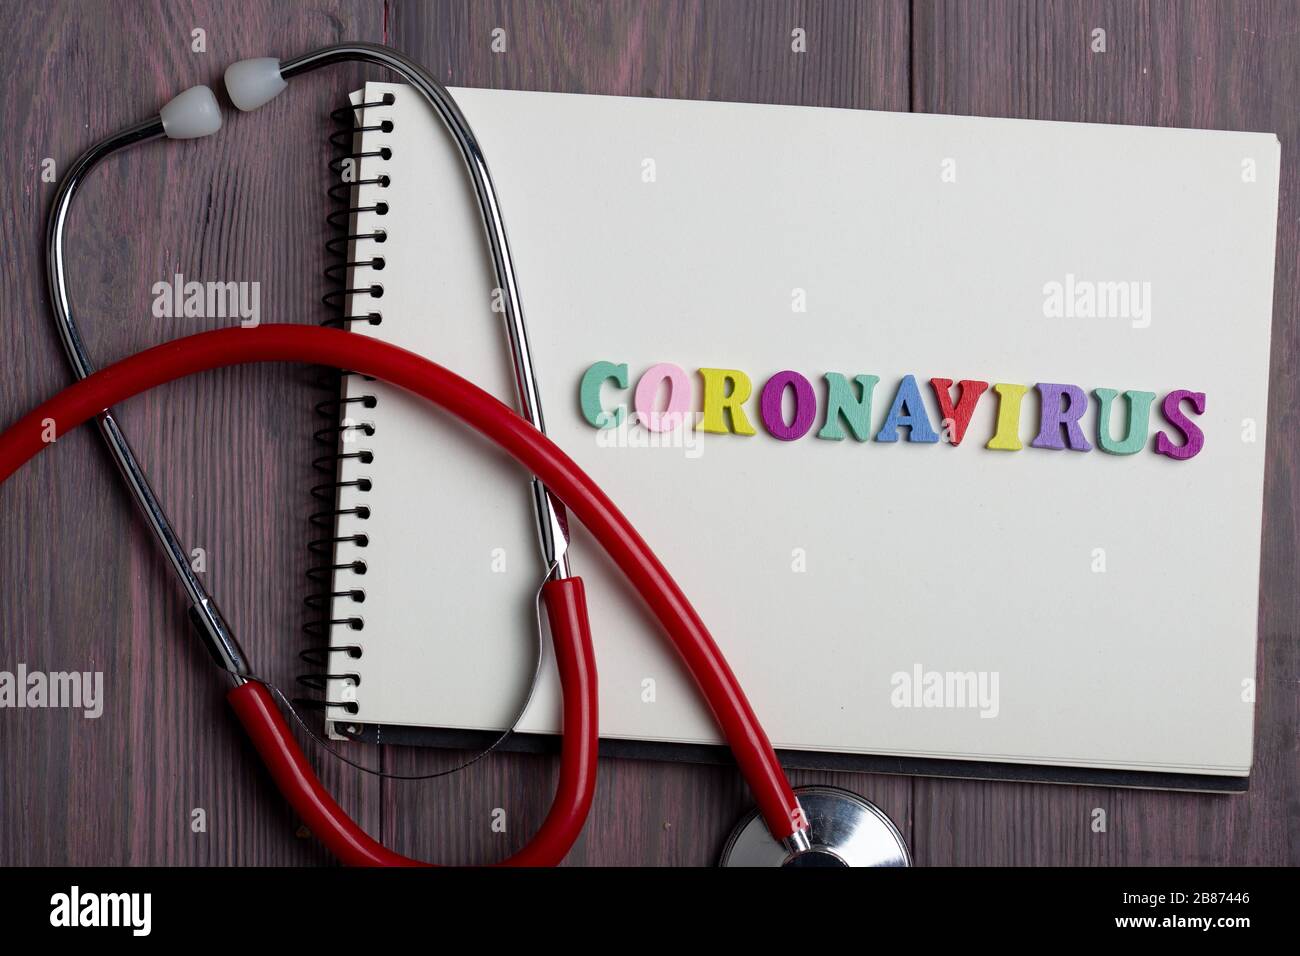 Text Coronavirus wooden letters on notebook and stethoscope on wooden background - healthcare and medical concept Stock Photo